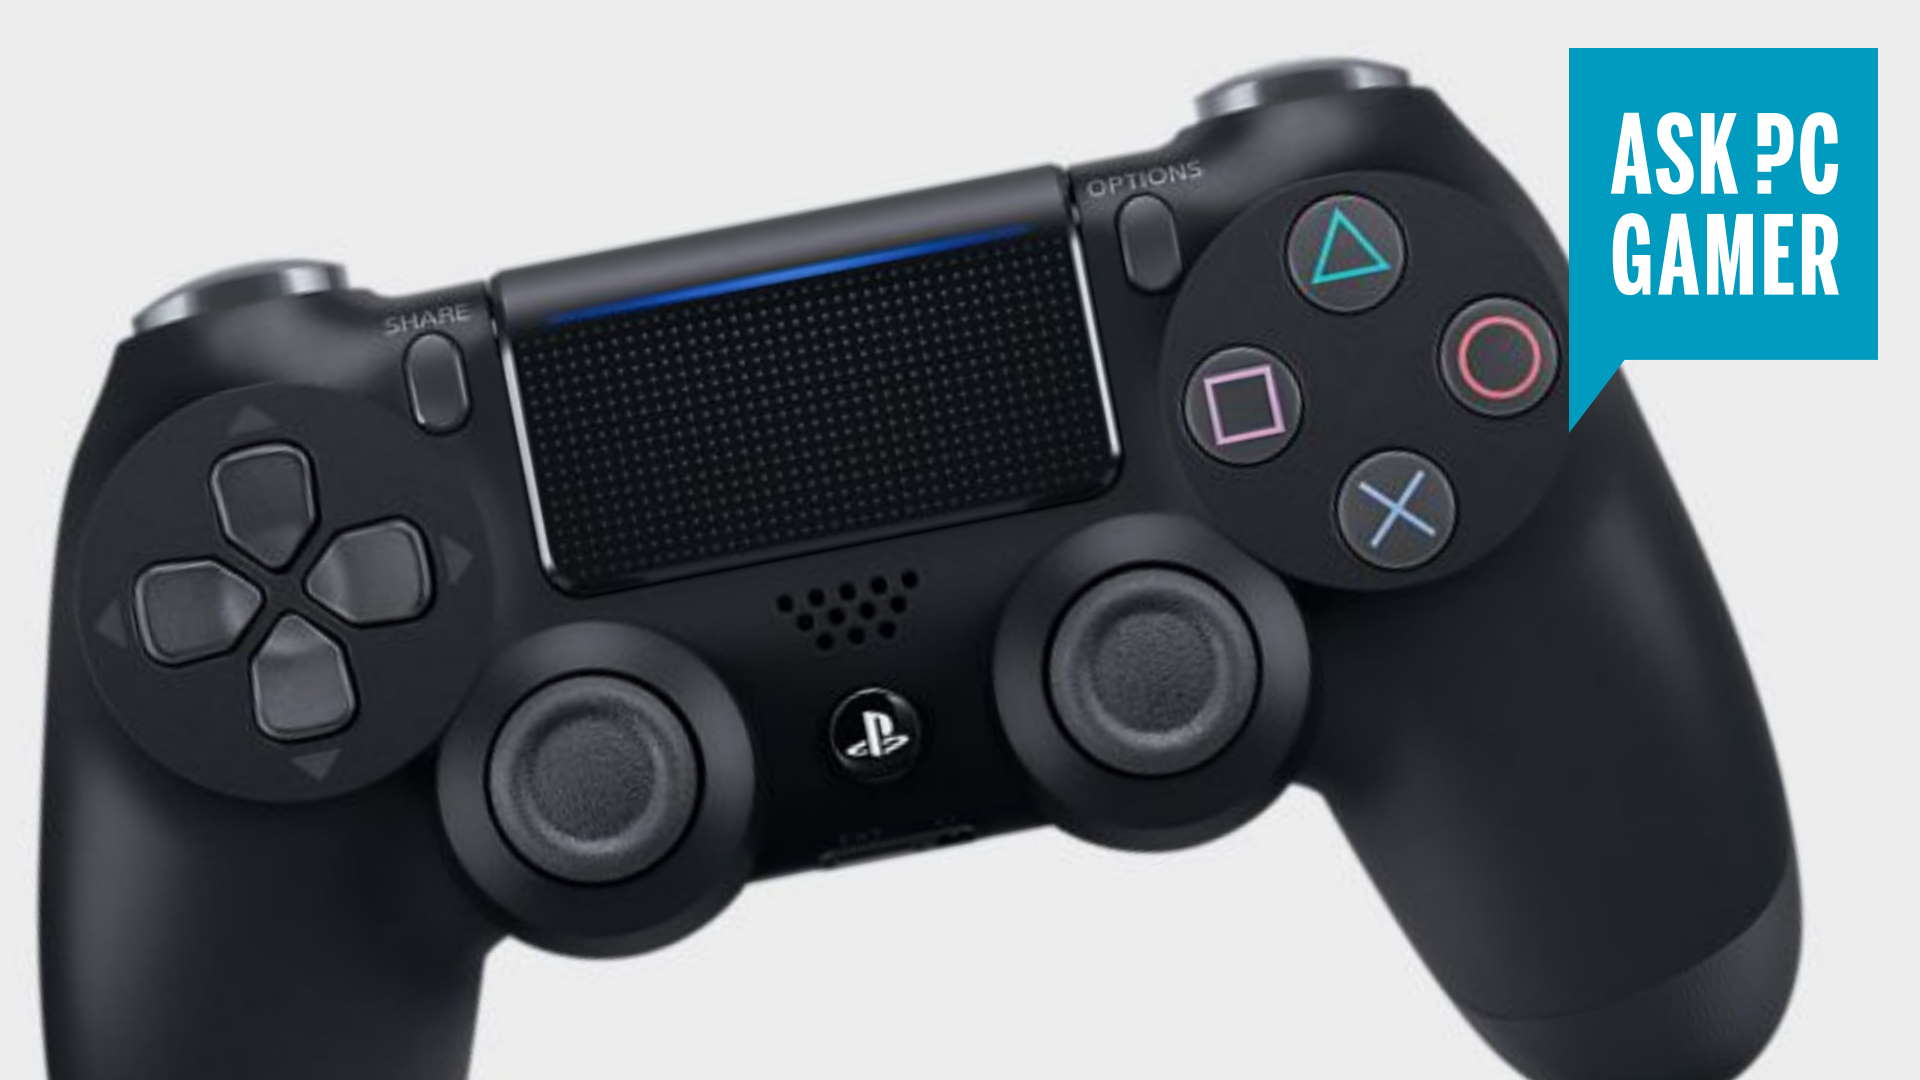 puree auditie Opknappen How to use a PS4 controller on PC: | PC Gamer